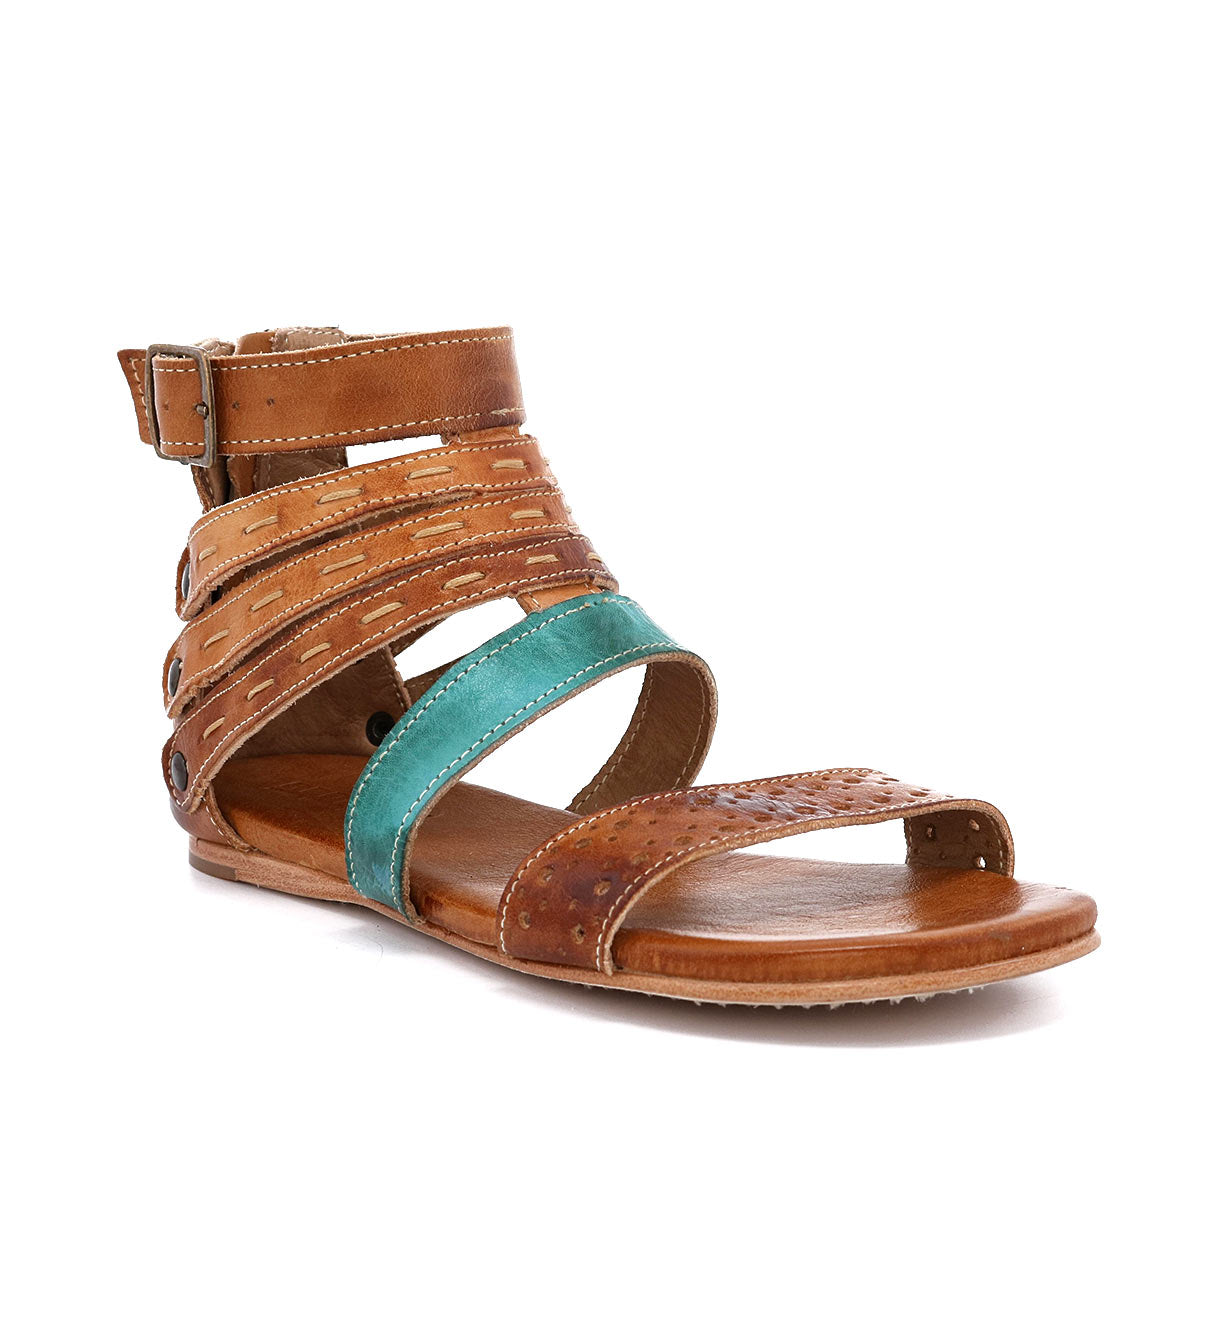 A women's sandal with tan and turquoise straps called Artemis by Bed Stu.